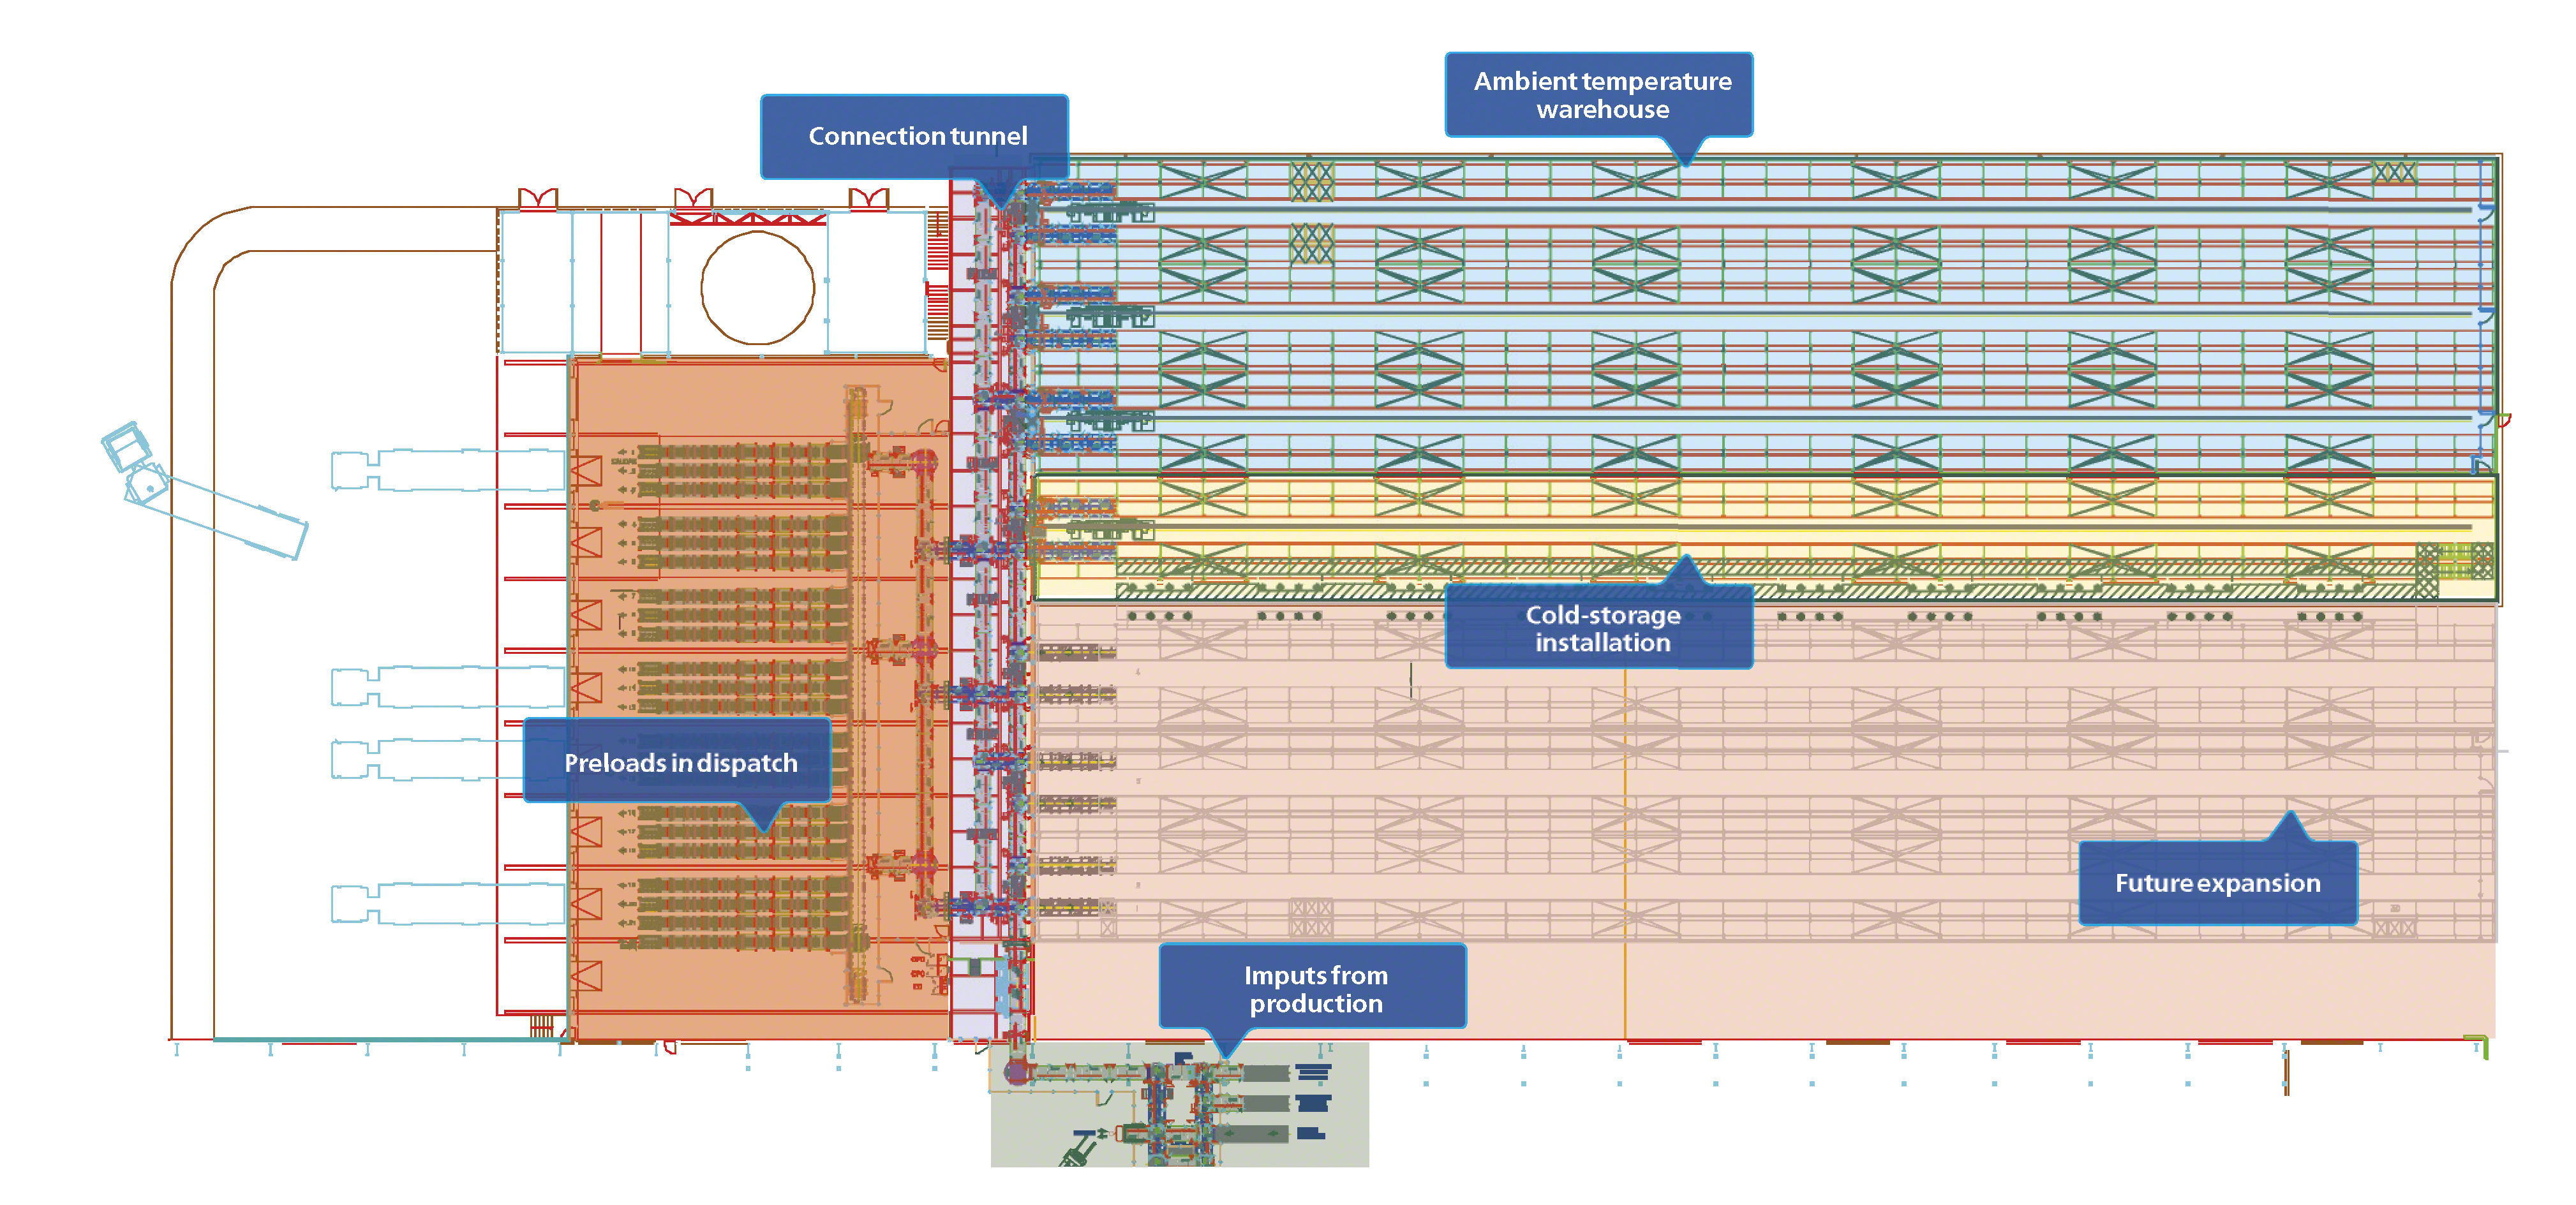 Warehouse layout from the Dafsa cold-storage installation which marks out the different temperature zones